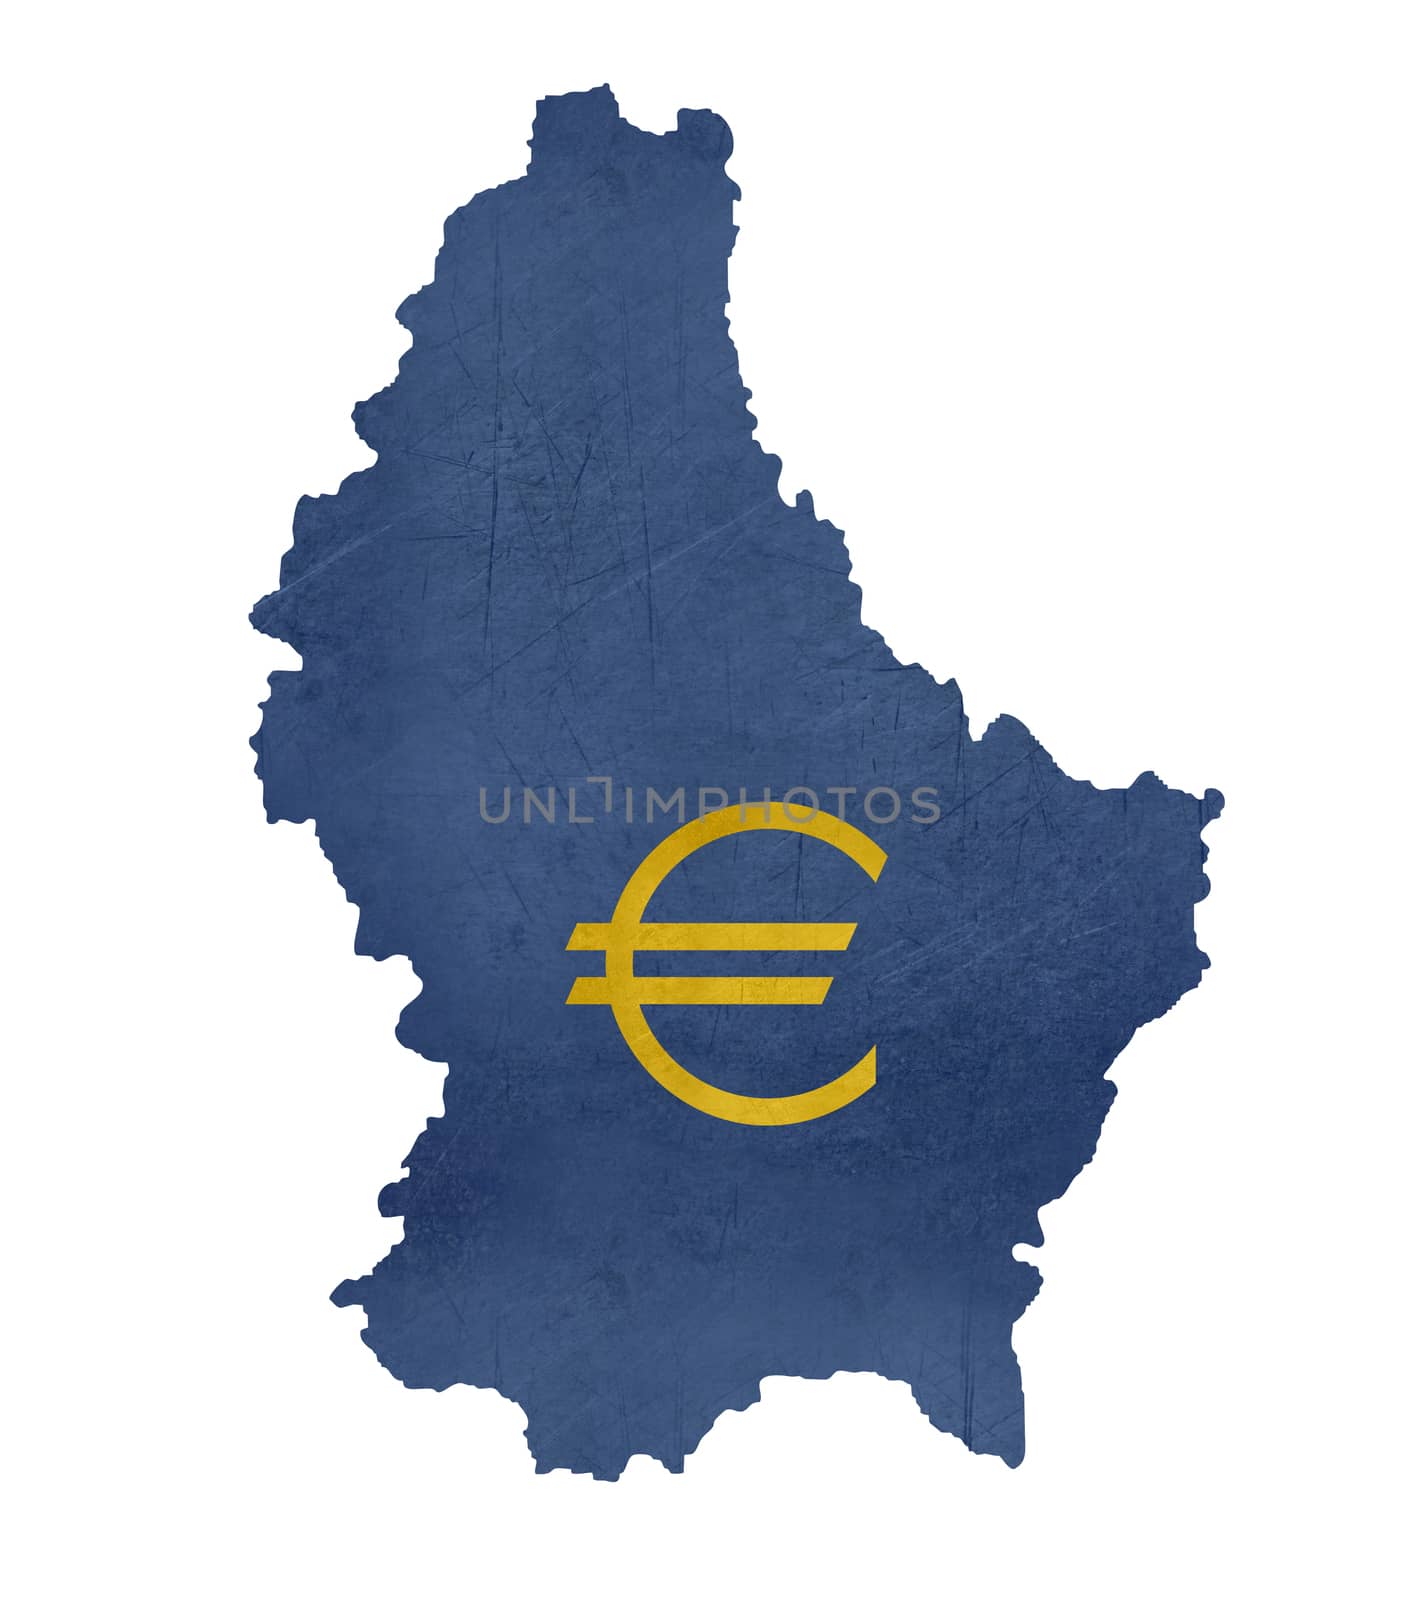 European currency symbol on map of Luxembourg isolated on white background.